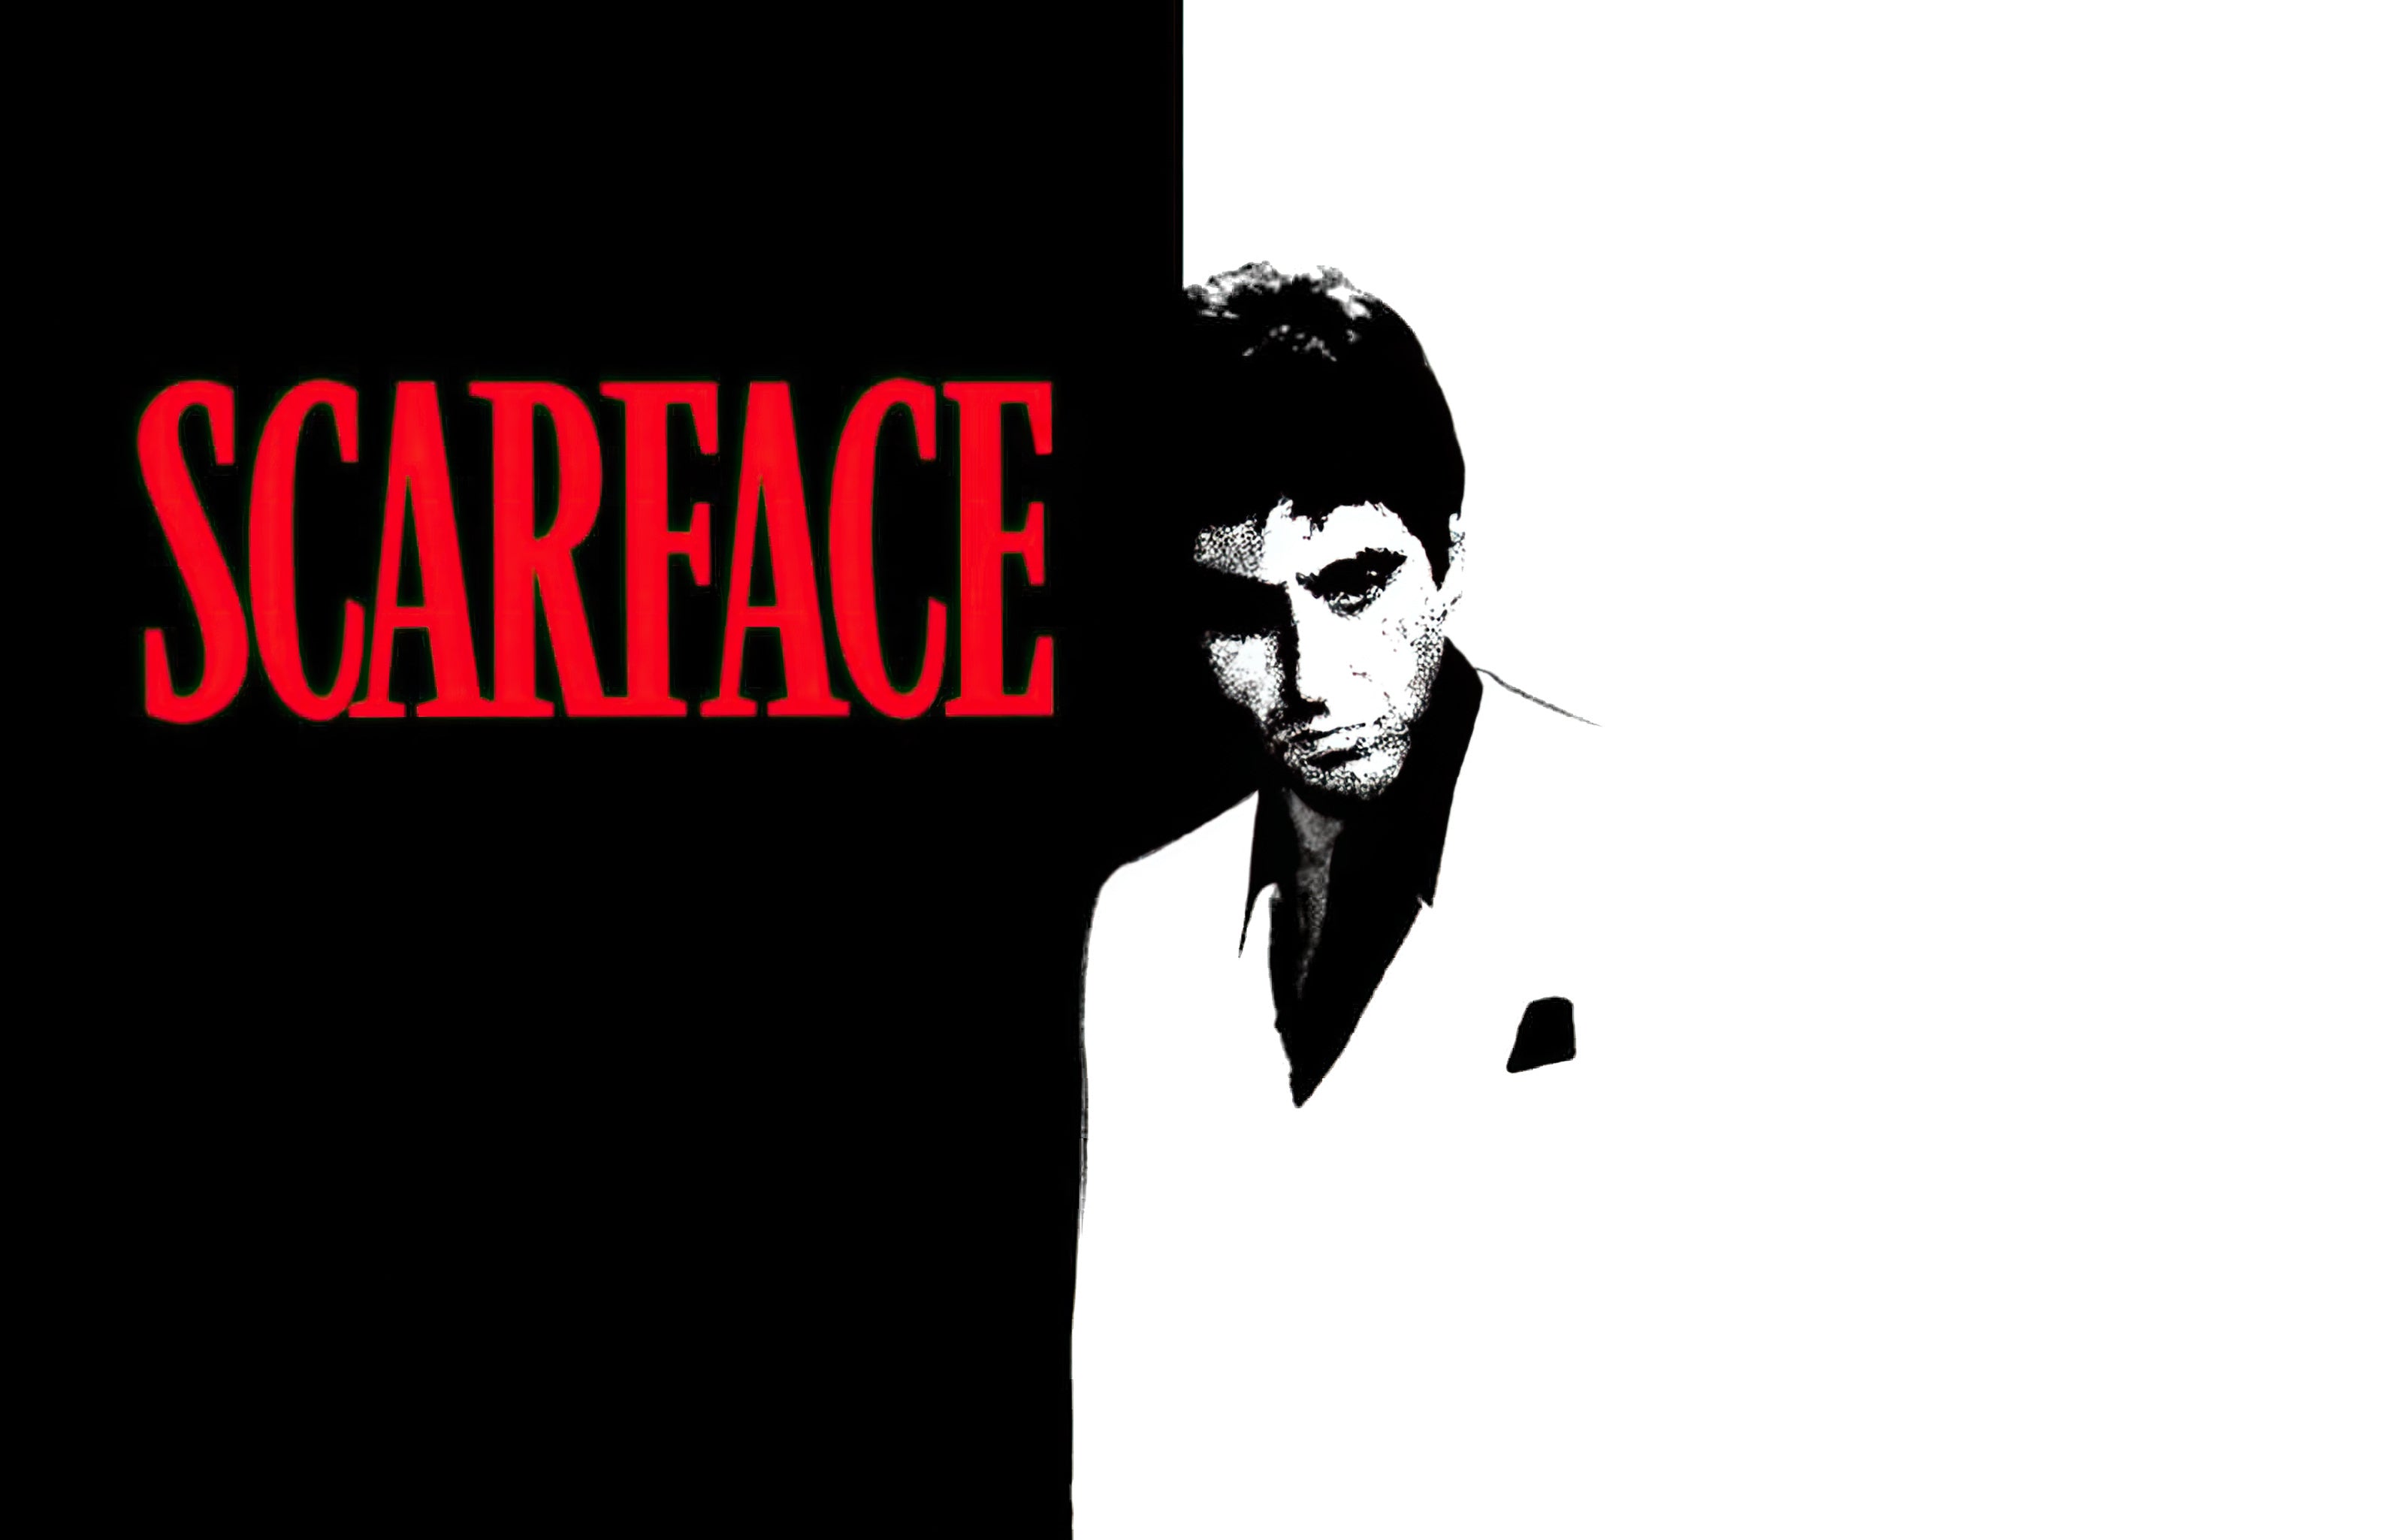 Scarface Script Screenplay - Image of Movie Poster